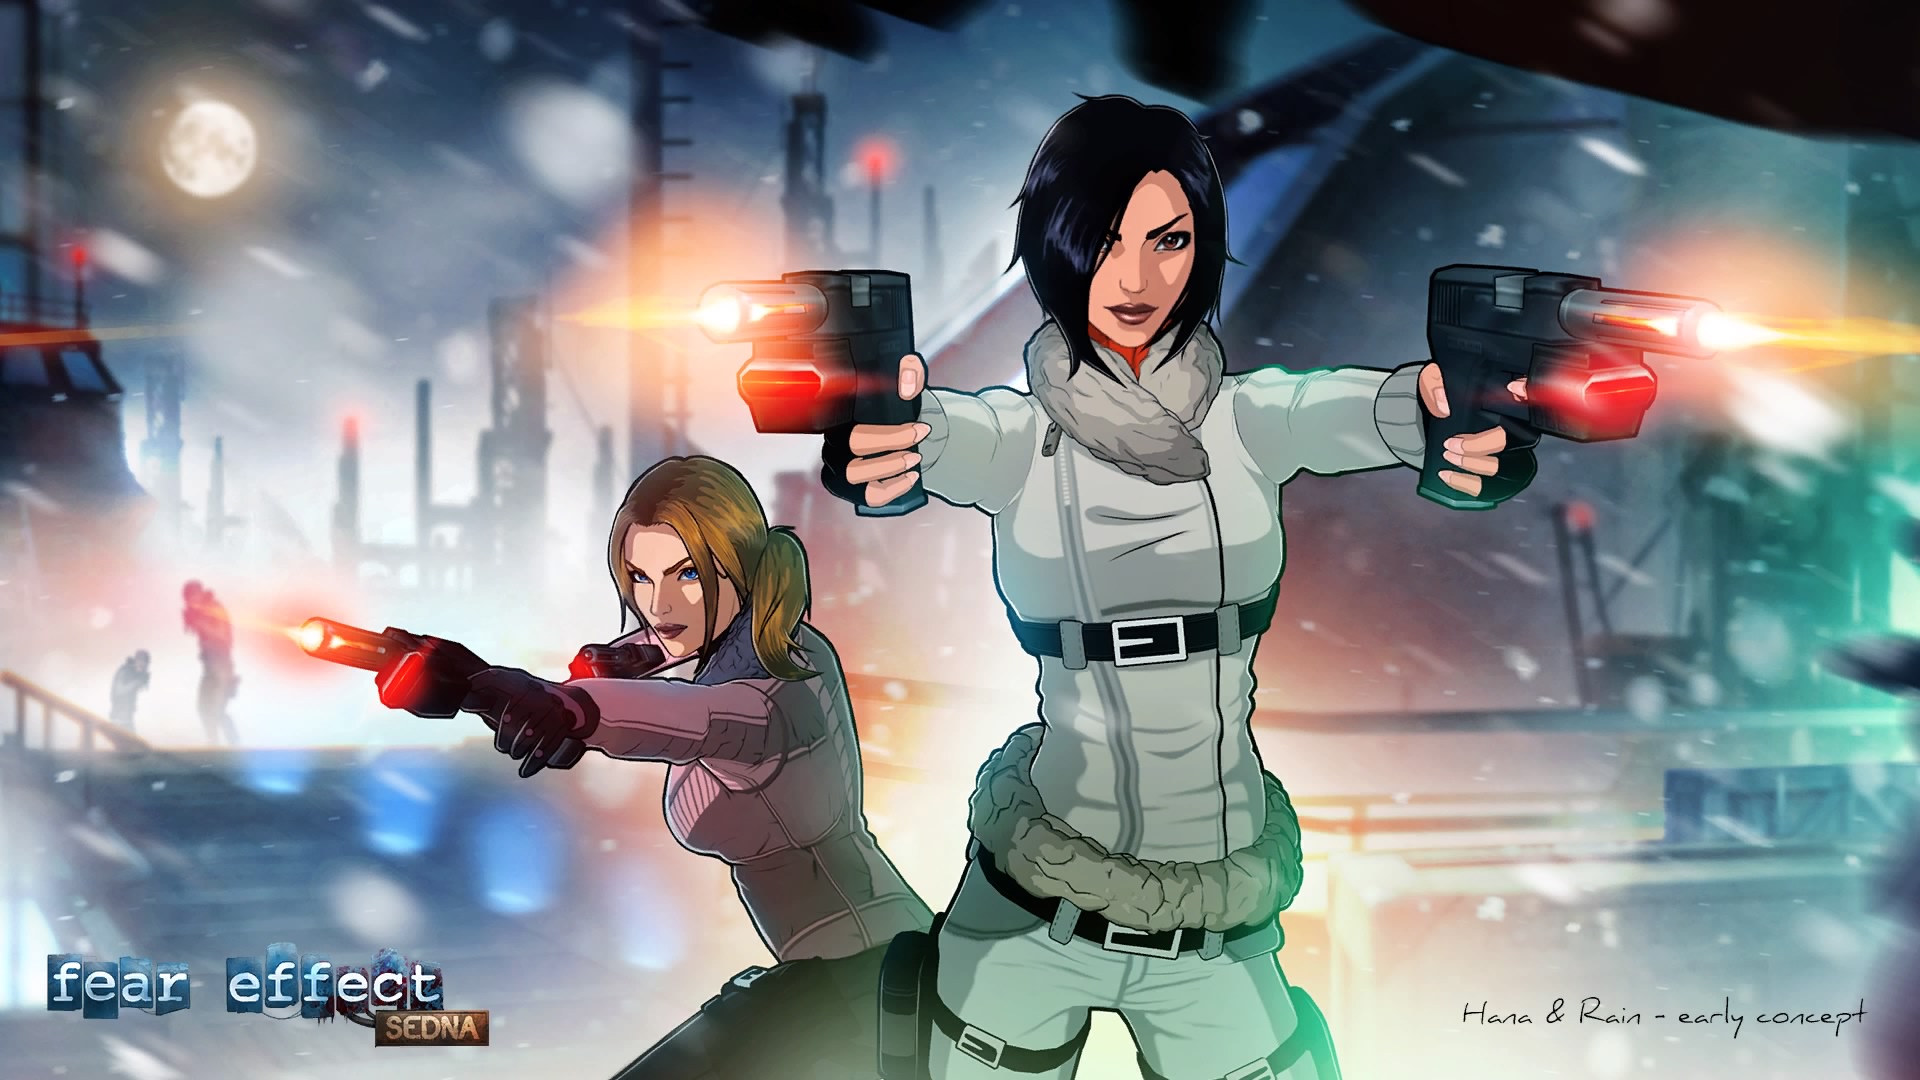 Fear Effect Sedna (2018 – Science Fiction – Playstation 4)